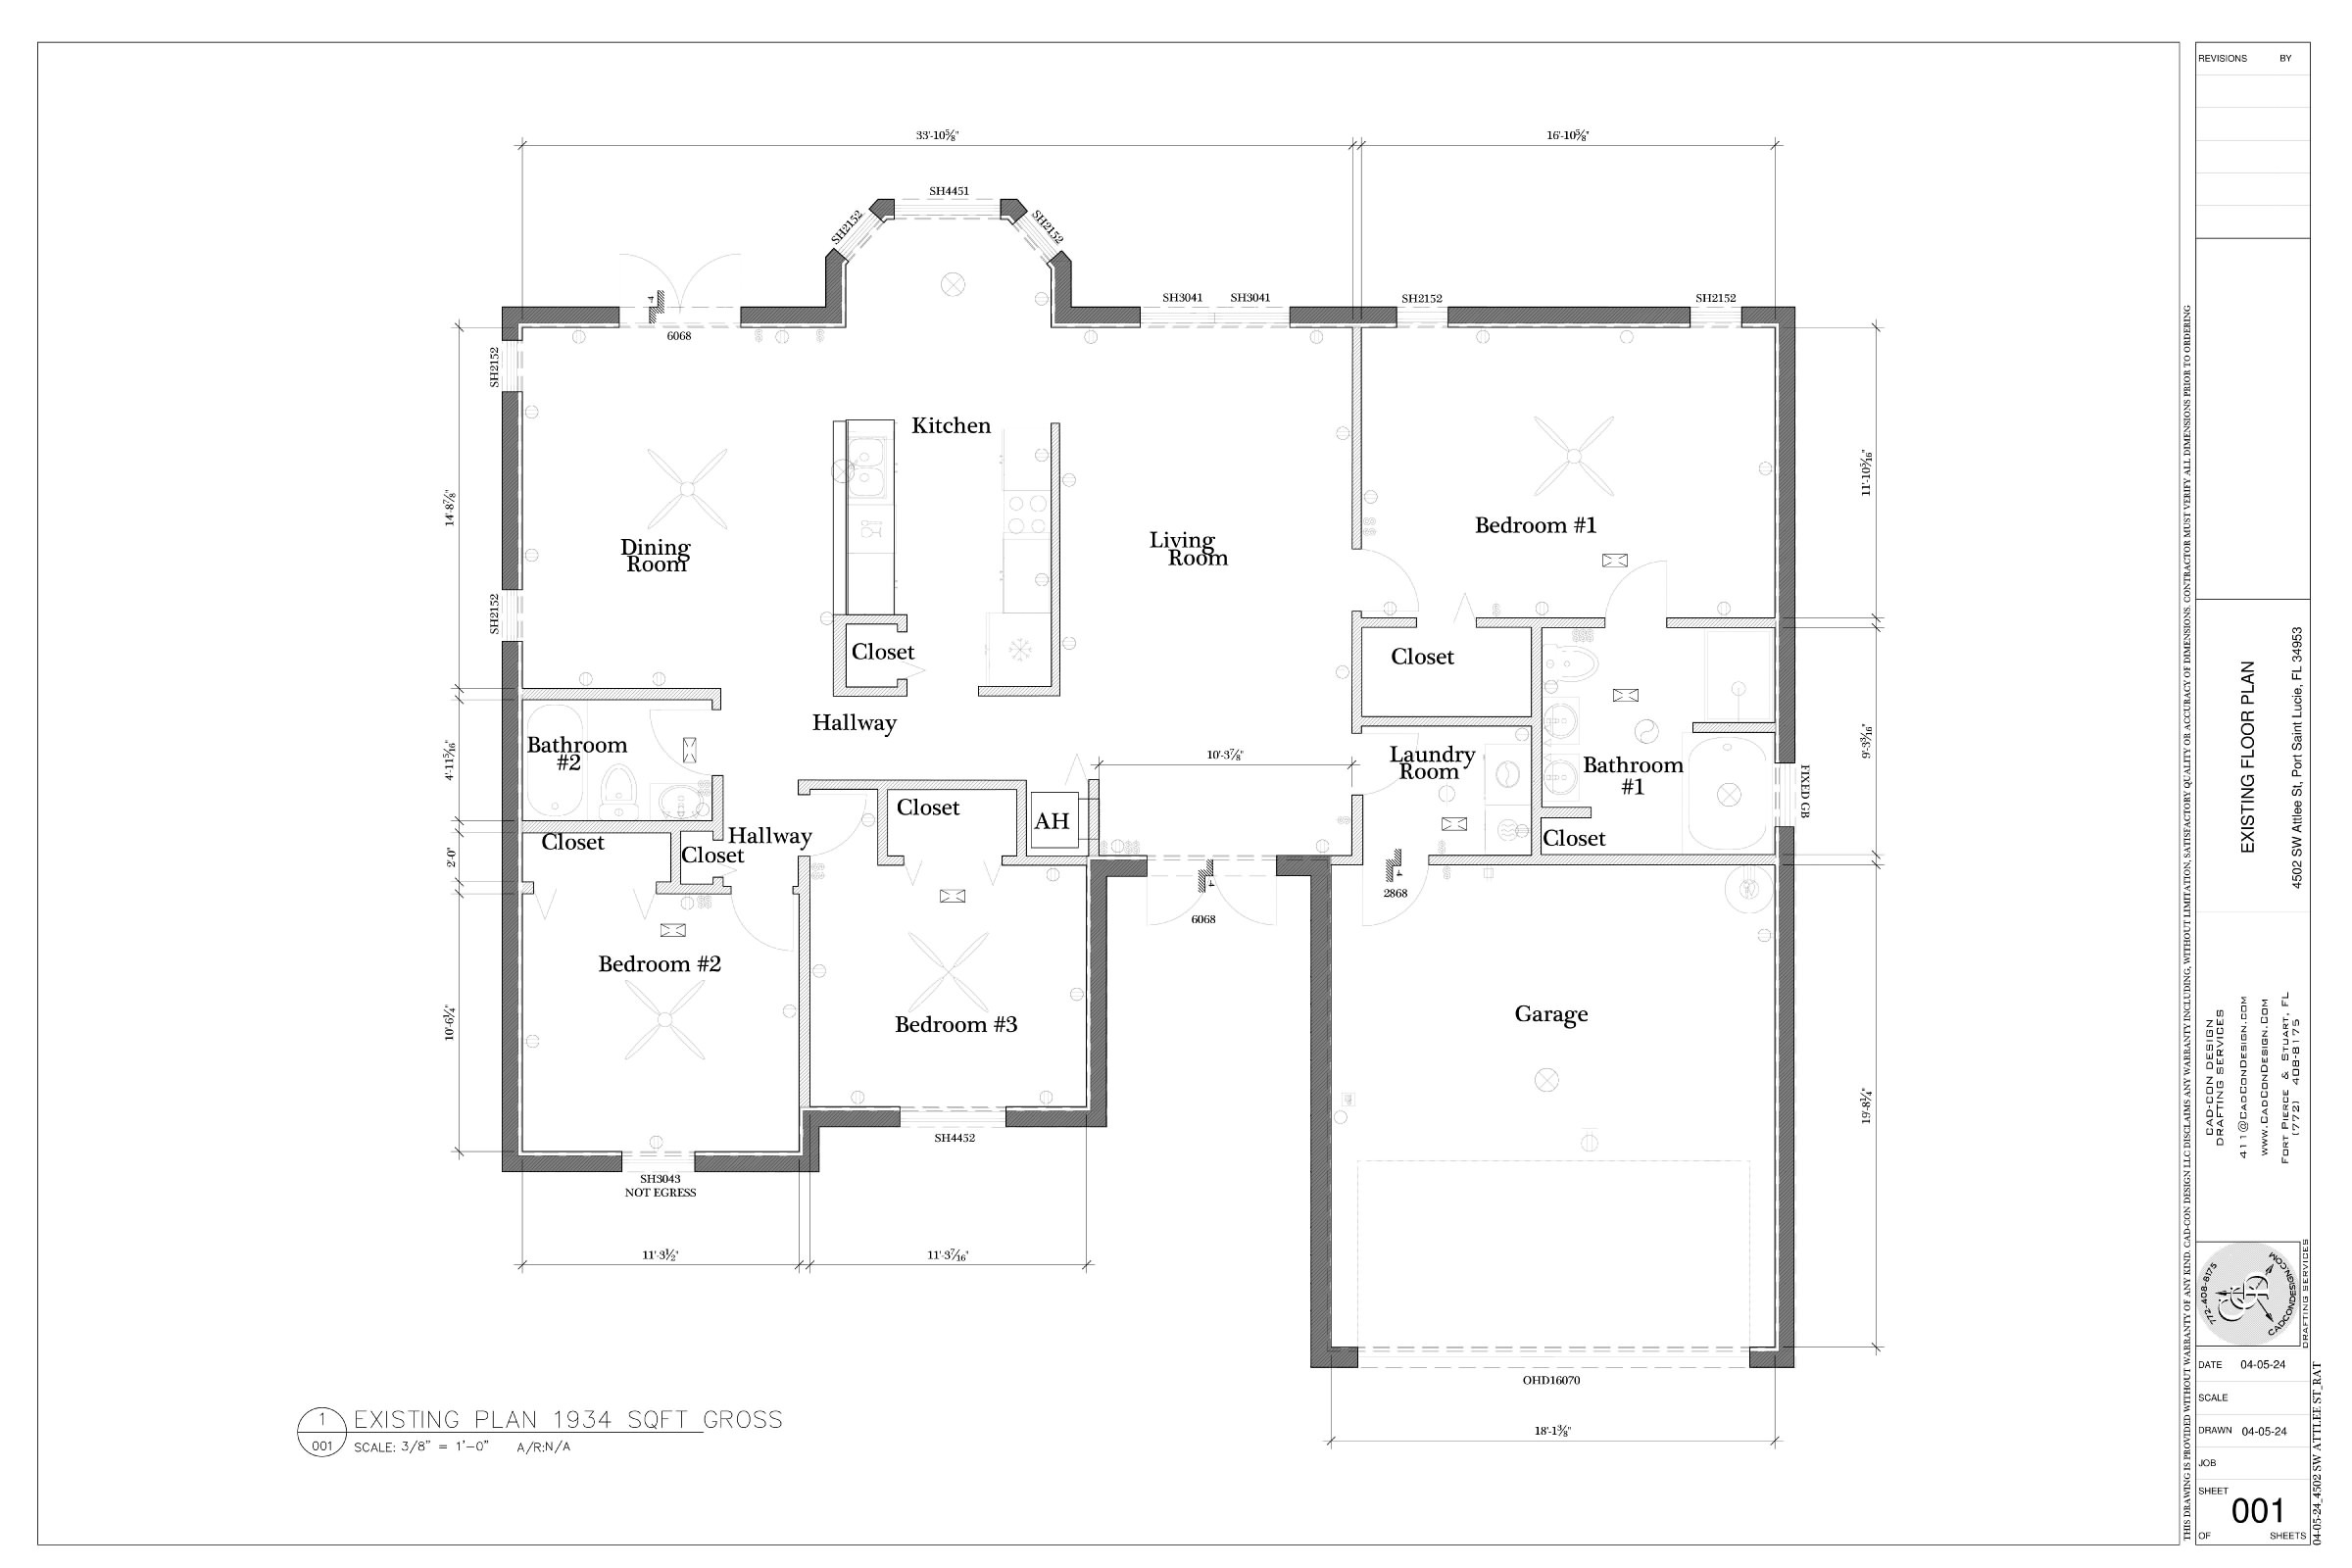 Get accurate & detailed floor plans fast!